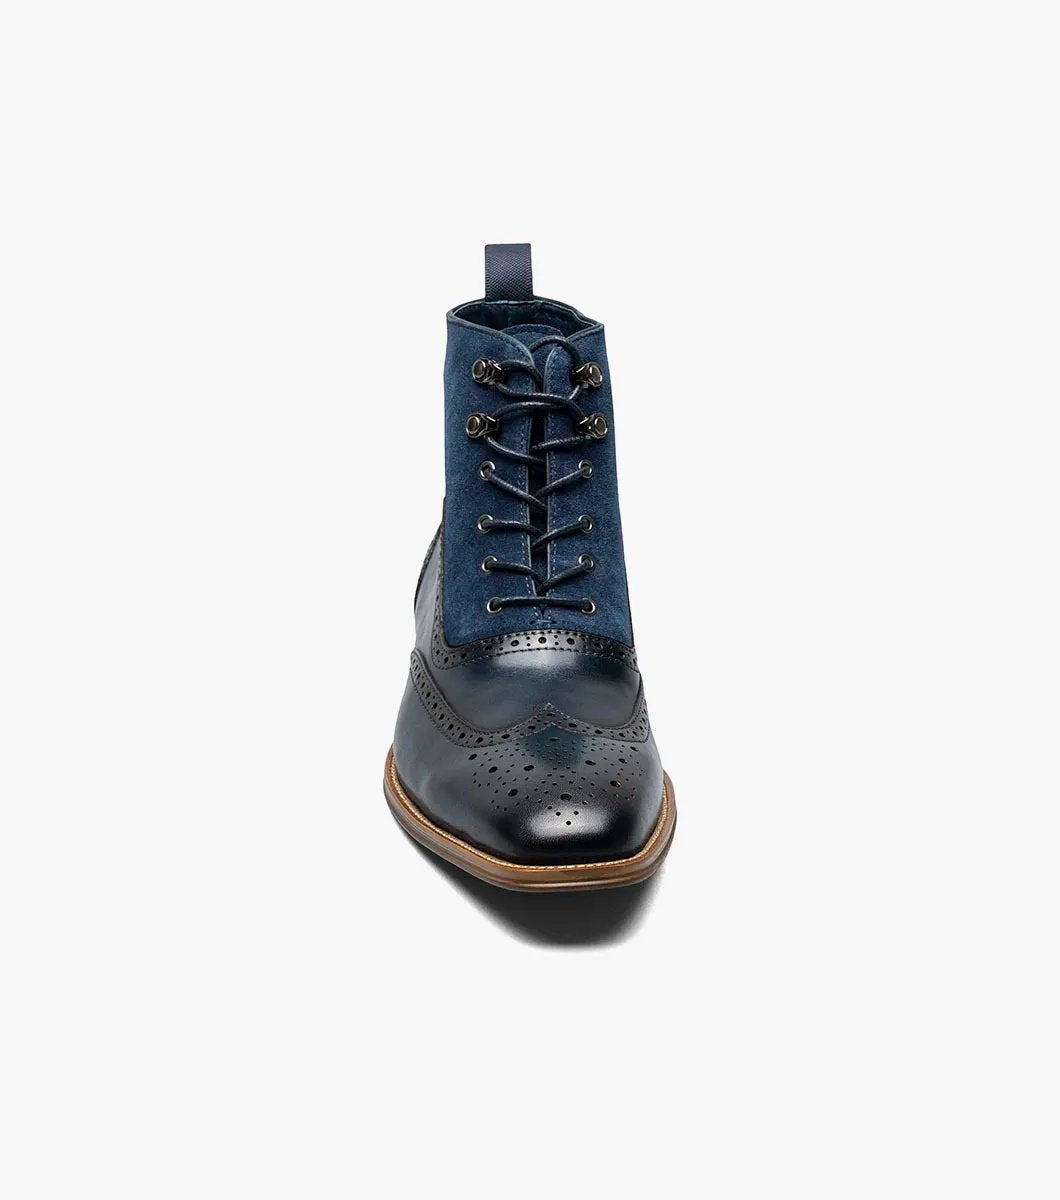 Stacy Adams - MALONE Wingtip Lace Up Boot - Navy - 25541-410